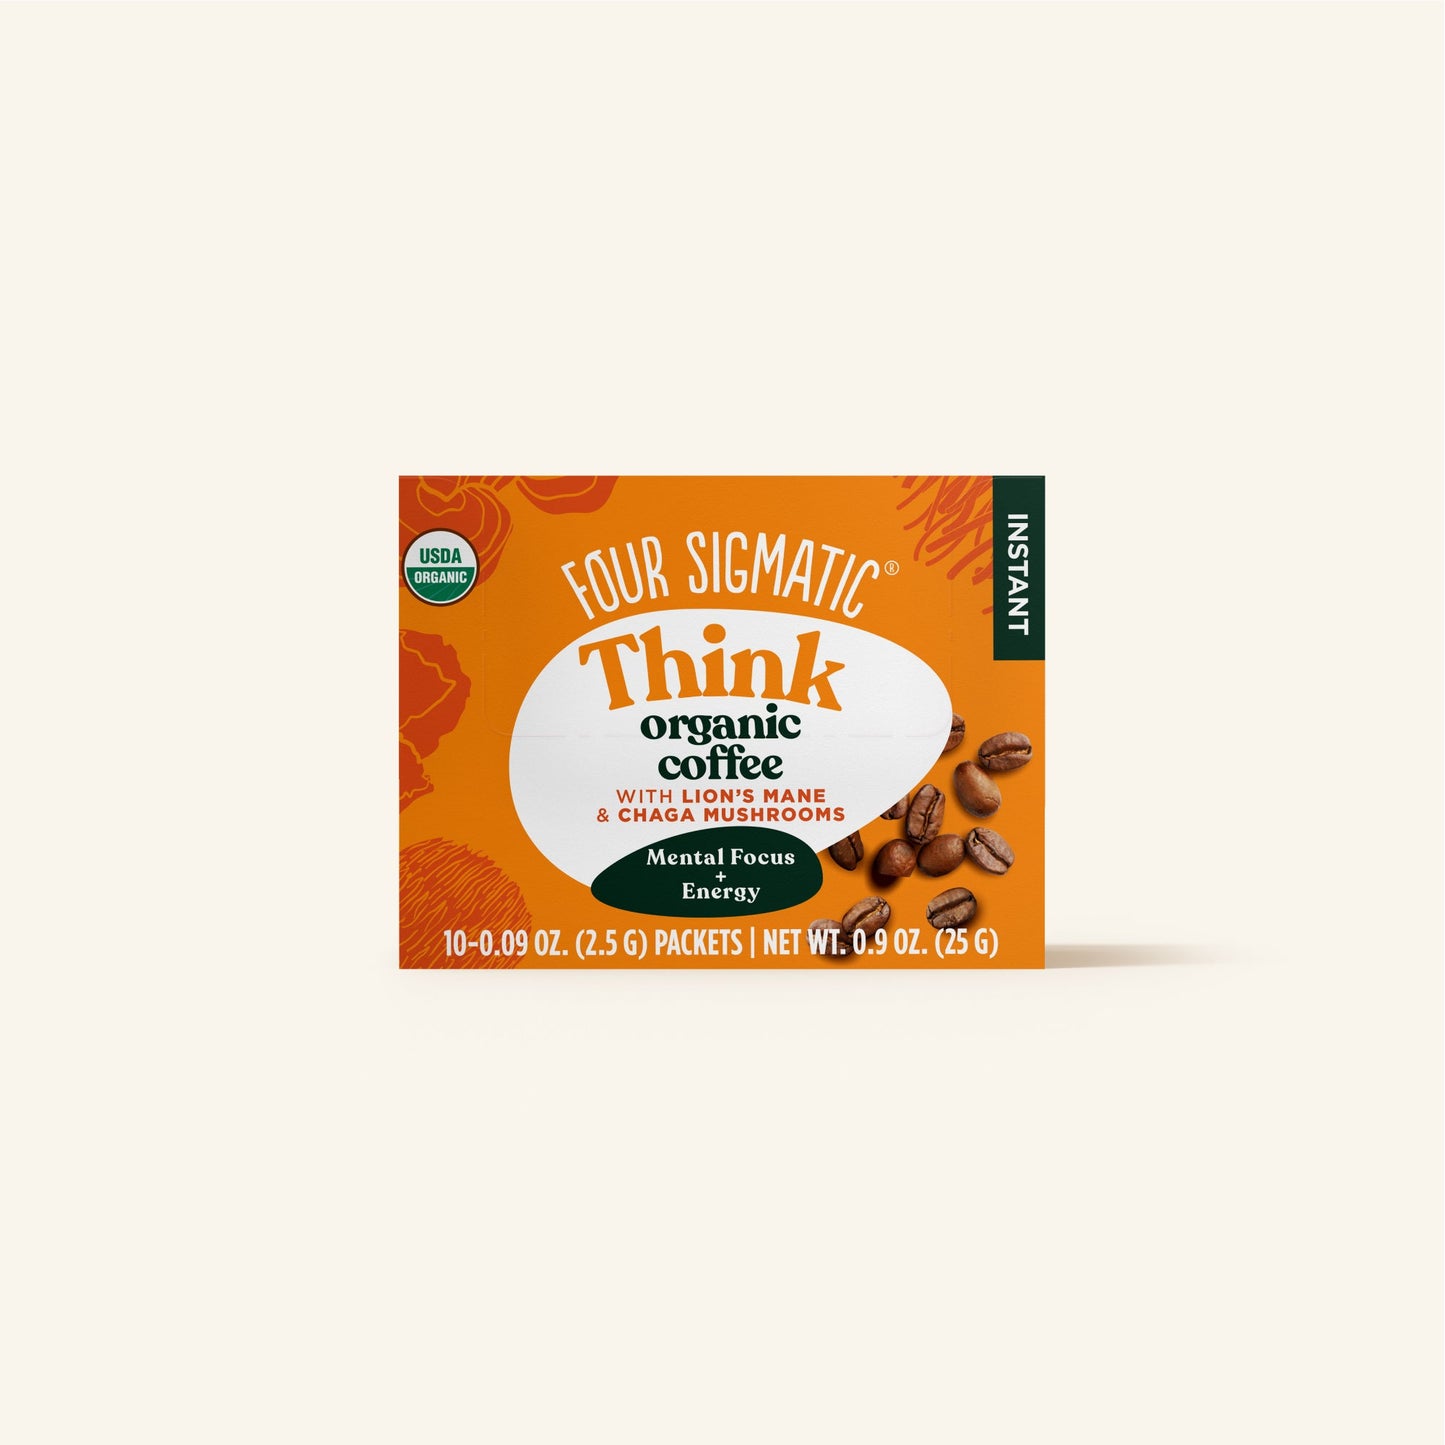 Think Instant Coffee Box 1-Pack